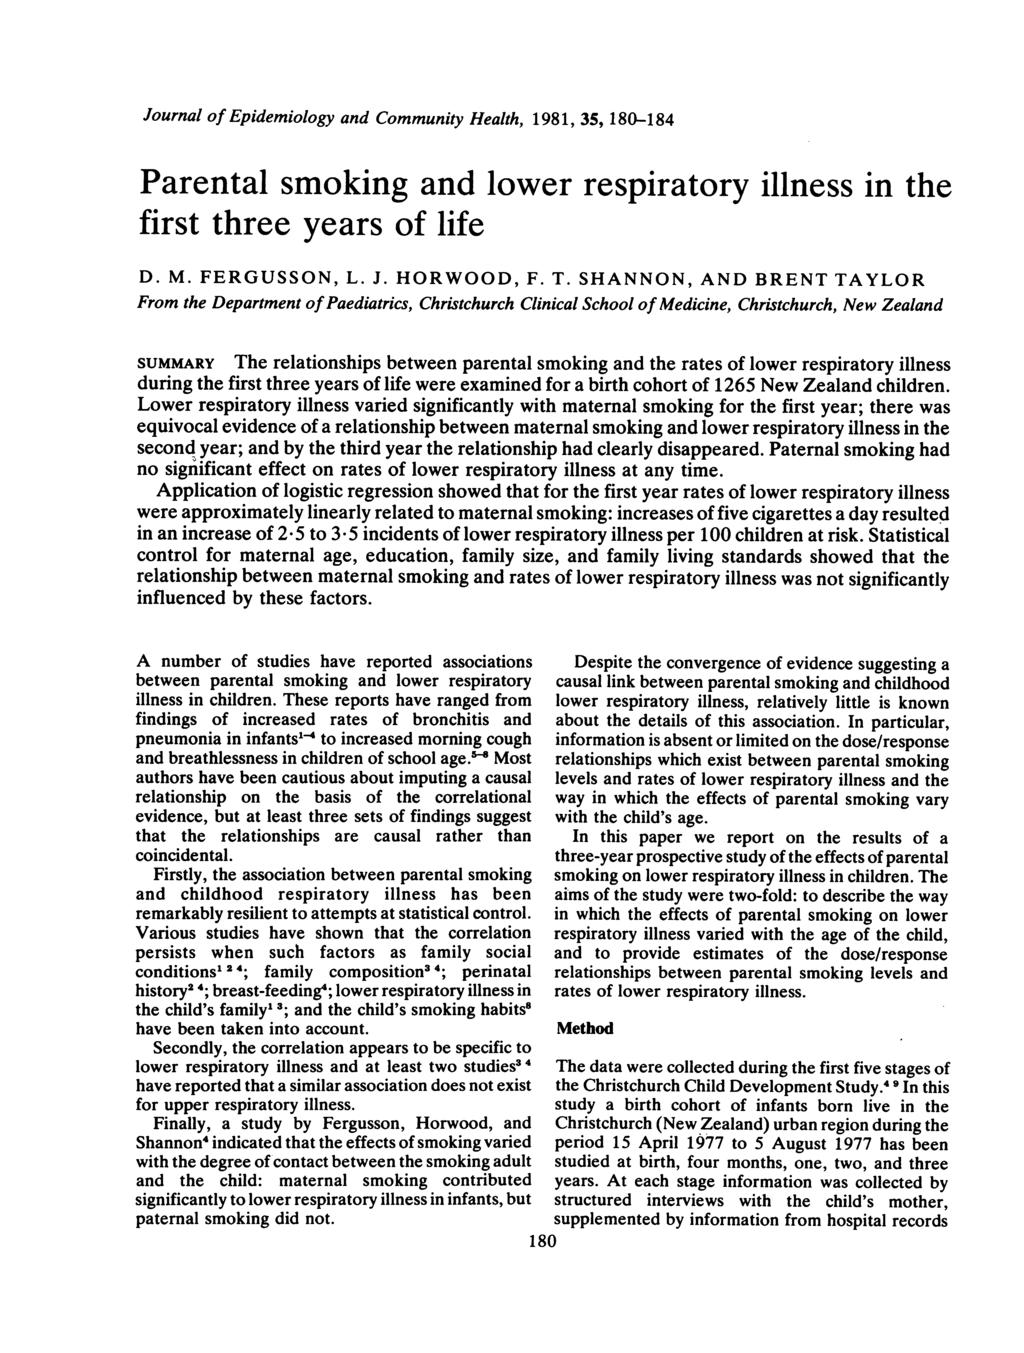 Journal of Epidemiology and Community Health, 1981, 35, 18-184 Parental smoking and lower respiratory illness in the first three years of life D. M. FERGUSSON, L. J. HORWOOD, F. T.